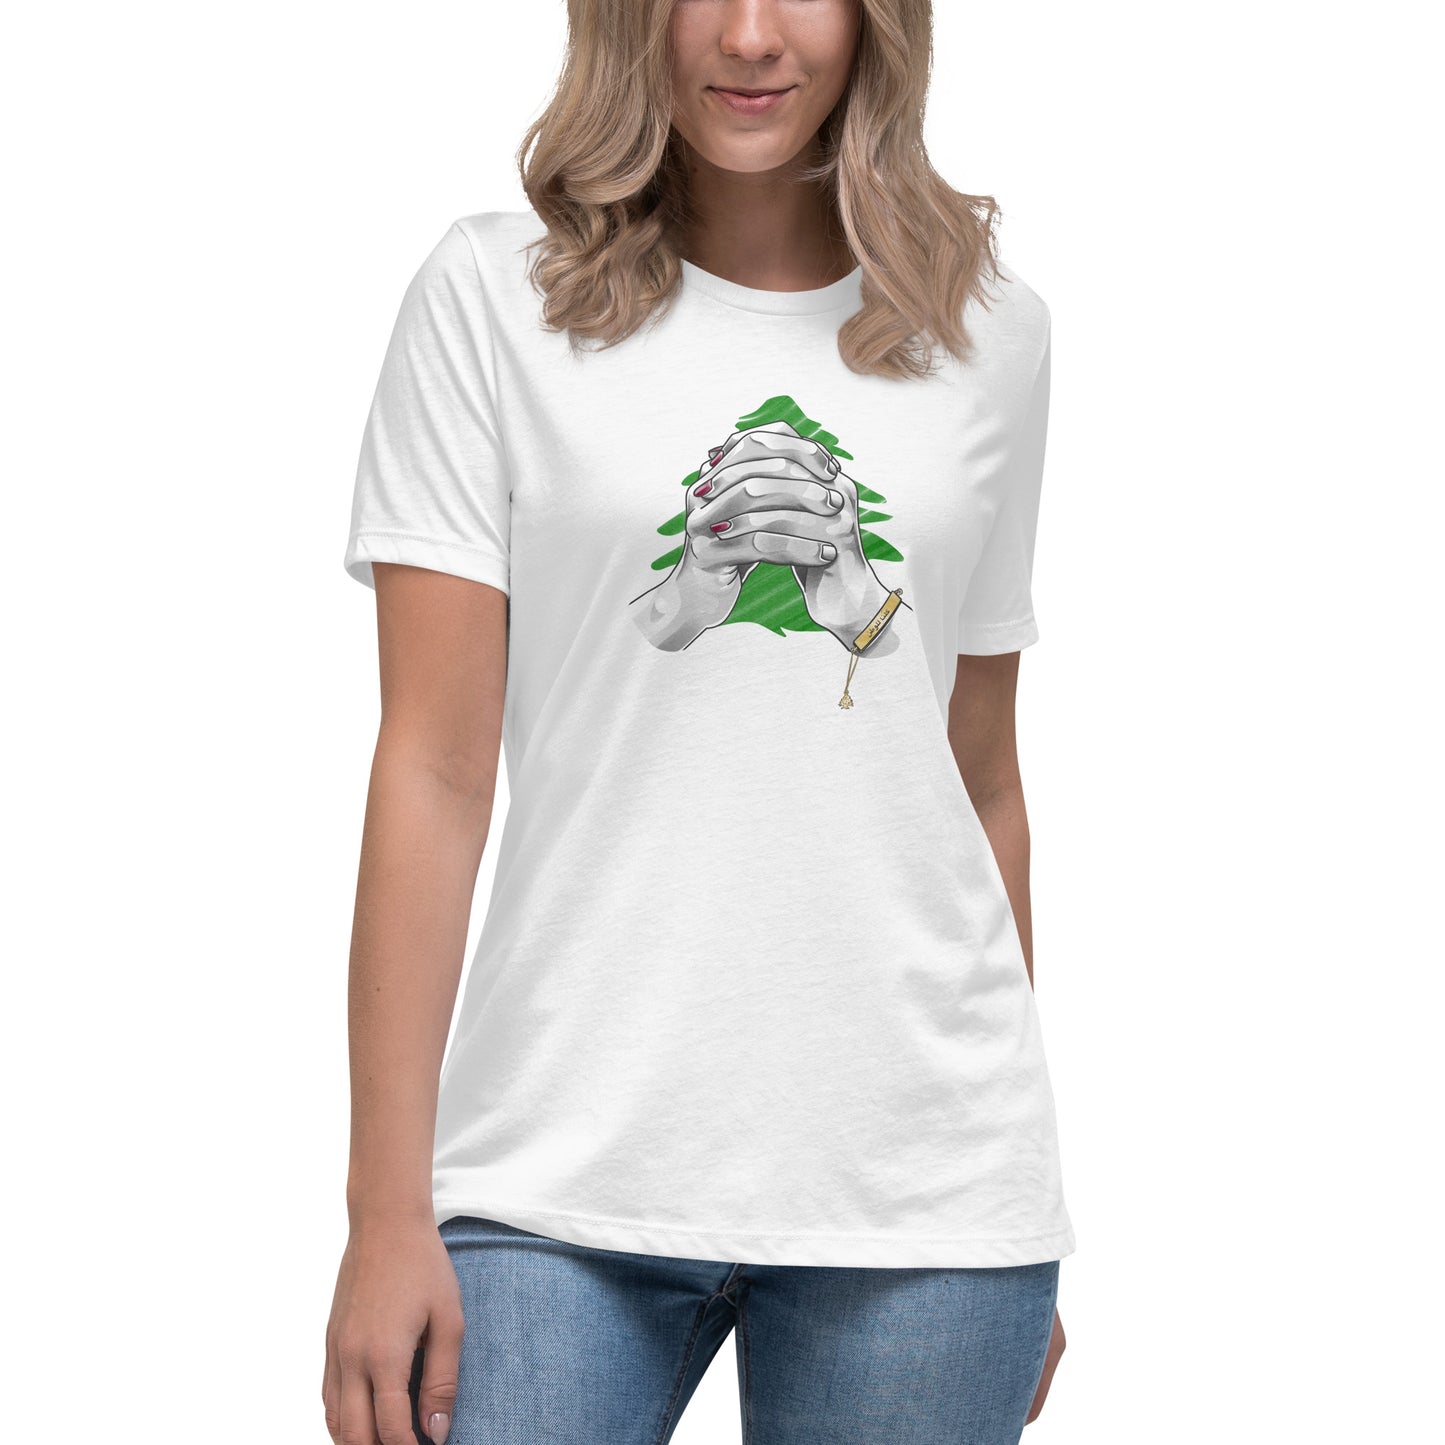 ONE T-Shirt (Green Edition)